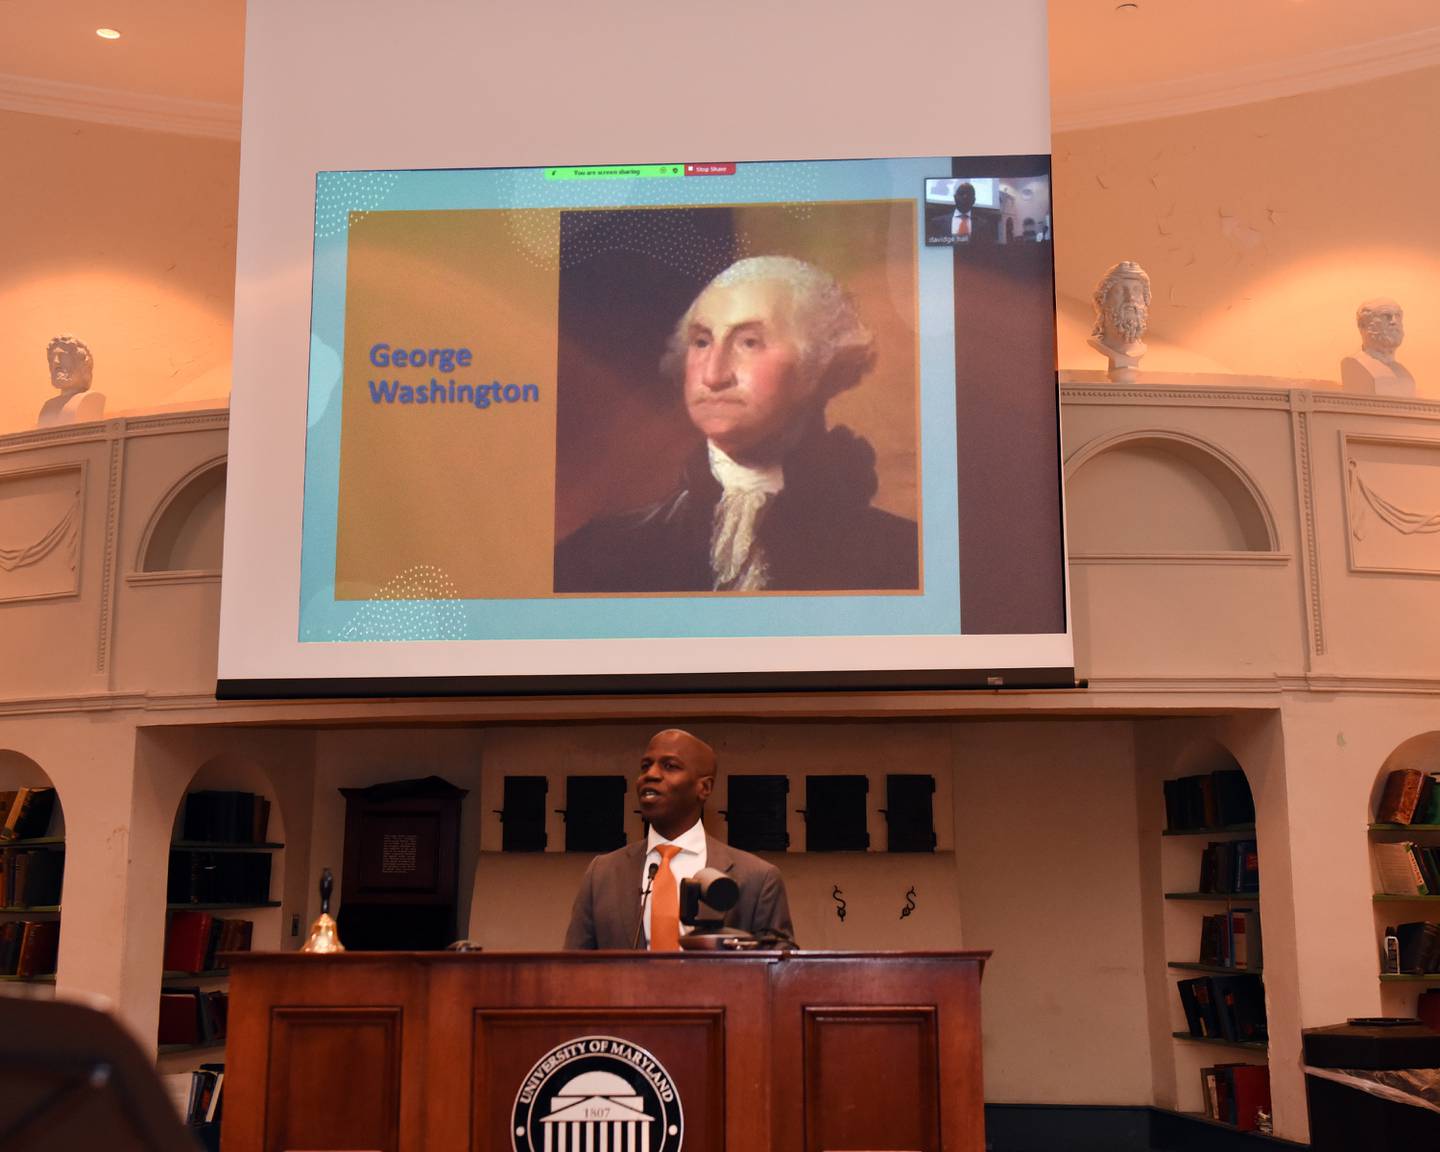 Dr. Rodney J. Taylor, chair of the department of otorhinolaryngology at the University of Maryland School of Medicine, presented a new diagnosis for the illness that killed George Washington.